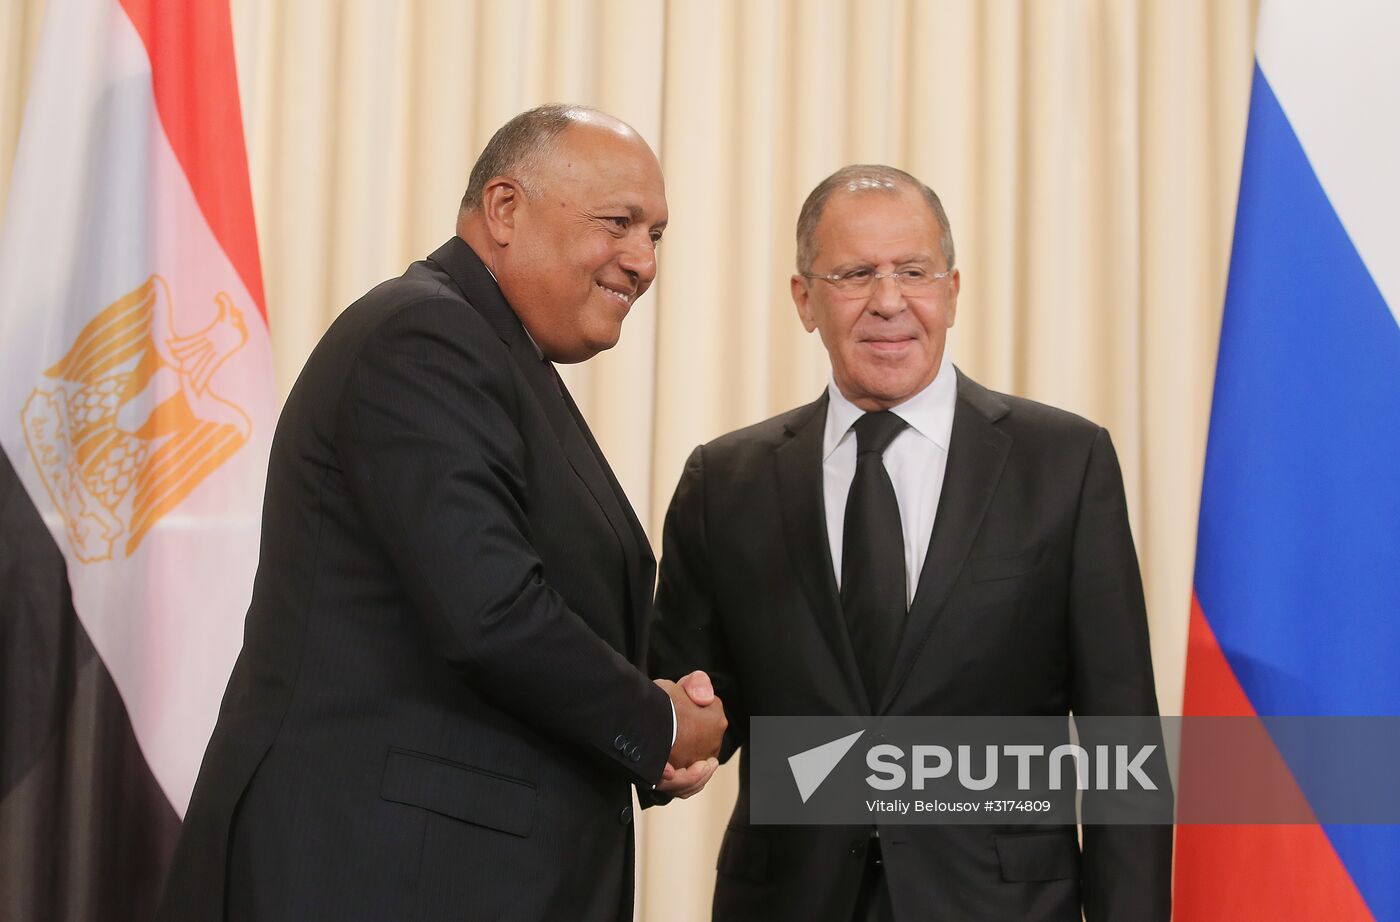 Russian Foreign Minister Sergei Lavrov meets with Egyptian Foreign Minister Sameh Shoukry